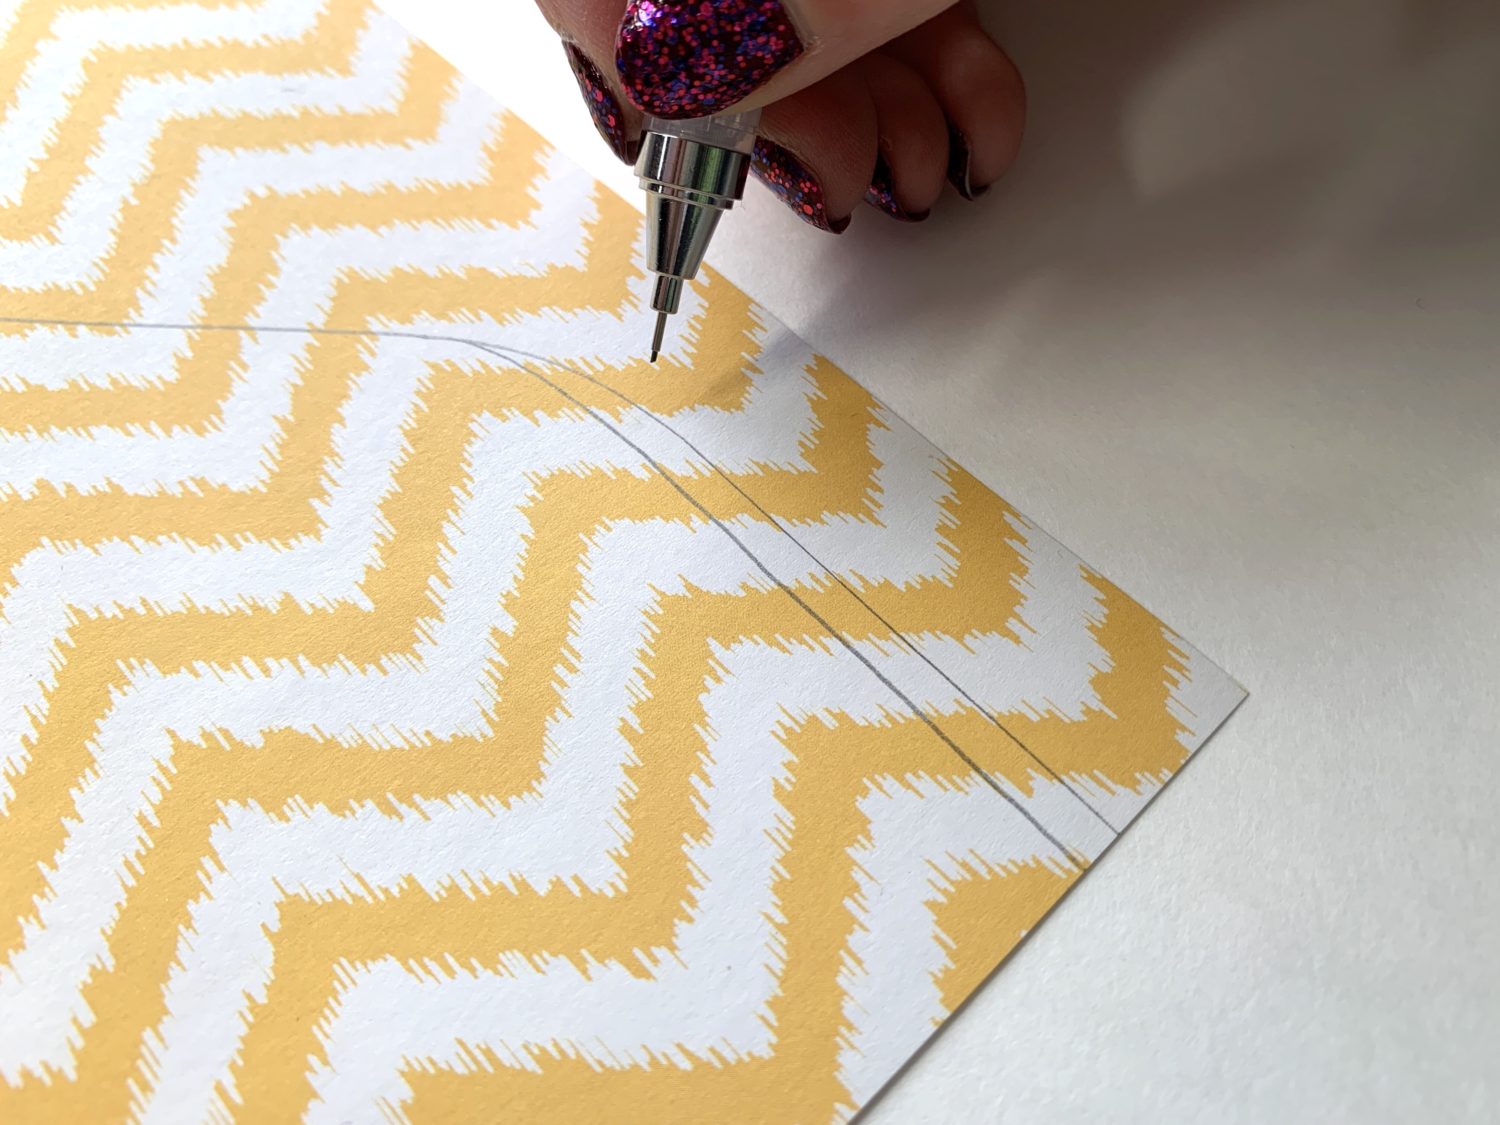 Use @tombowusa products to make your own envelope liner. Tutorial by @lepereletters. #envelopeliner #happymail